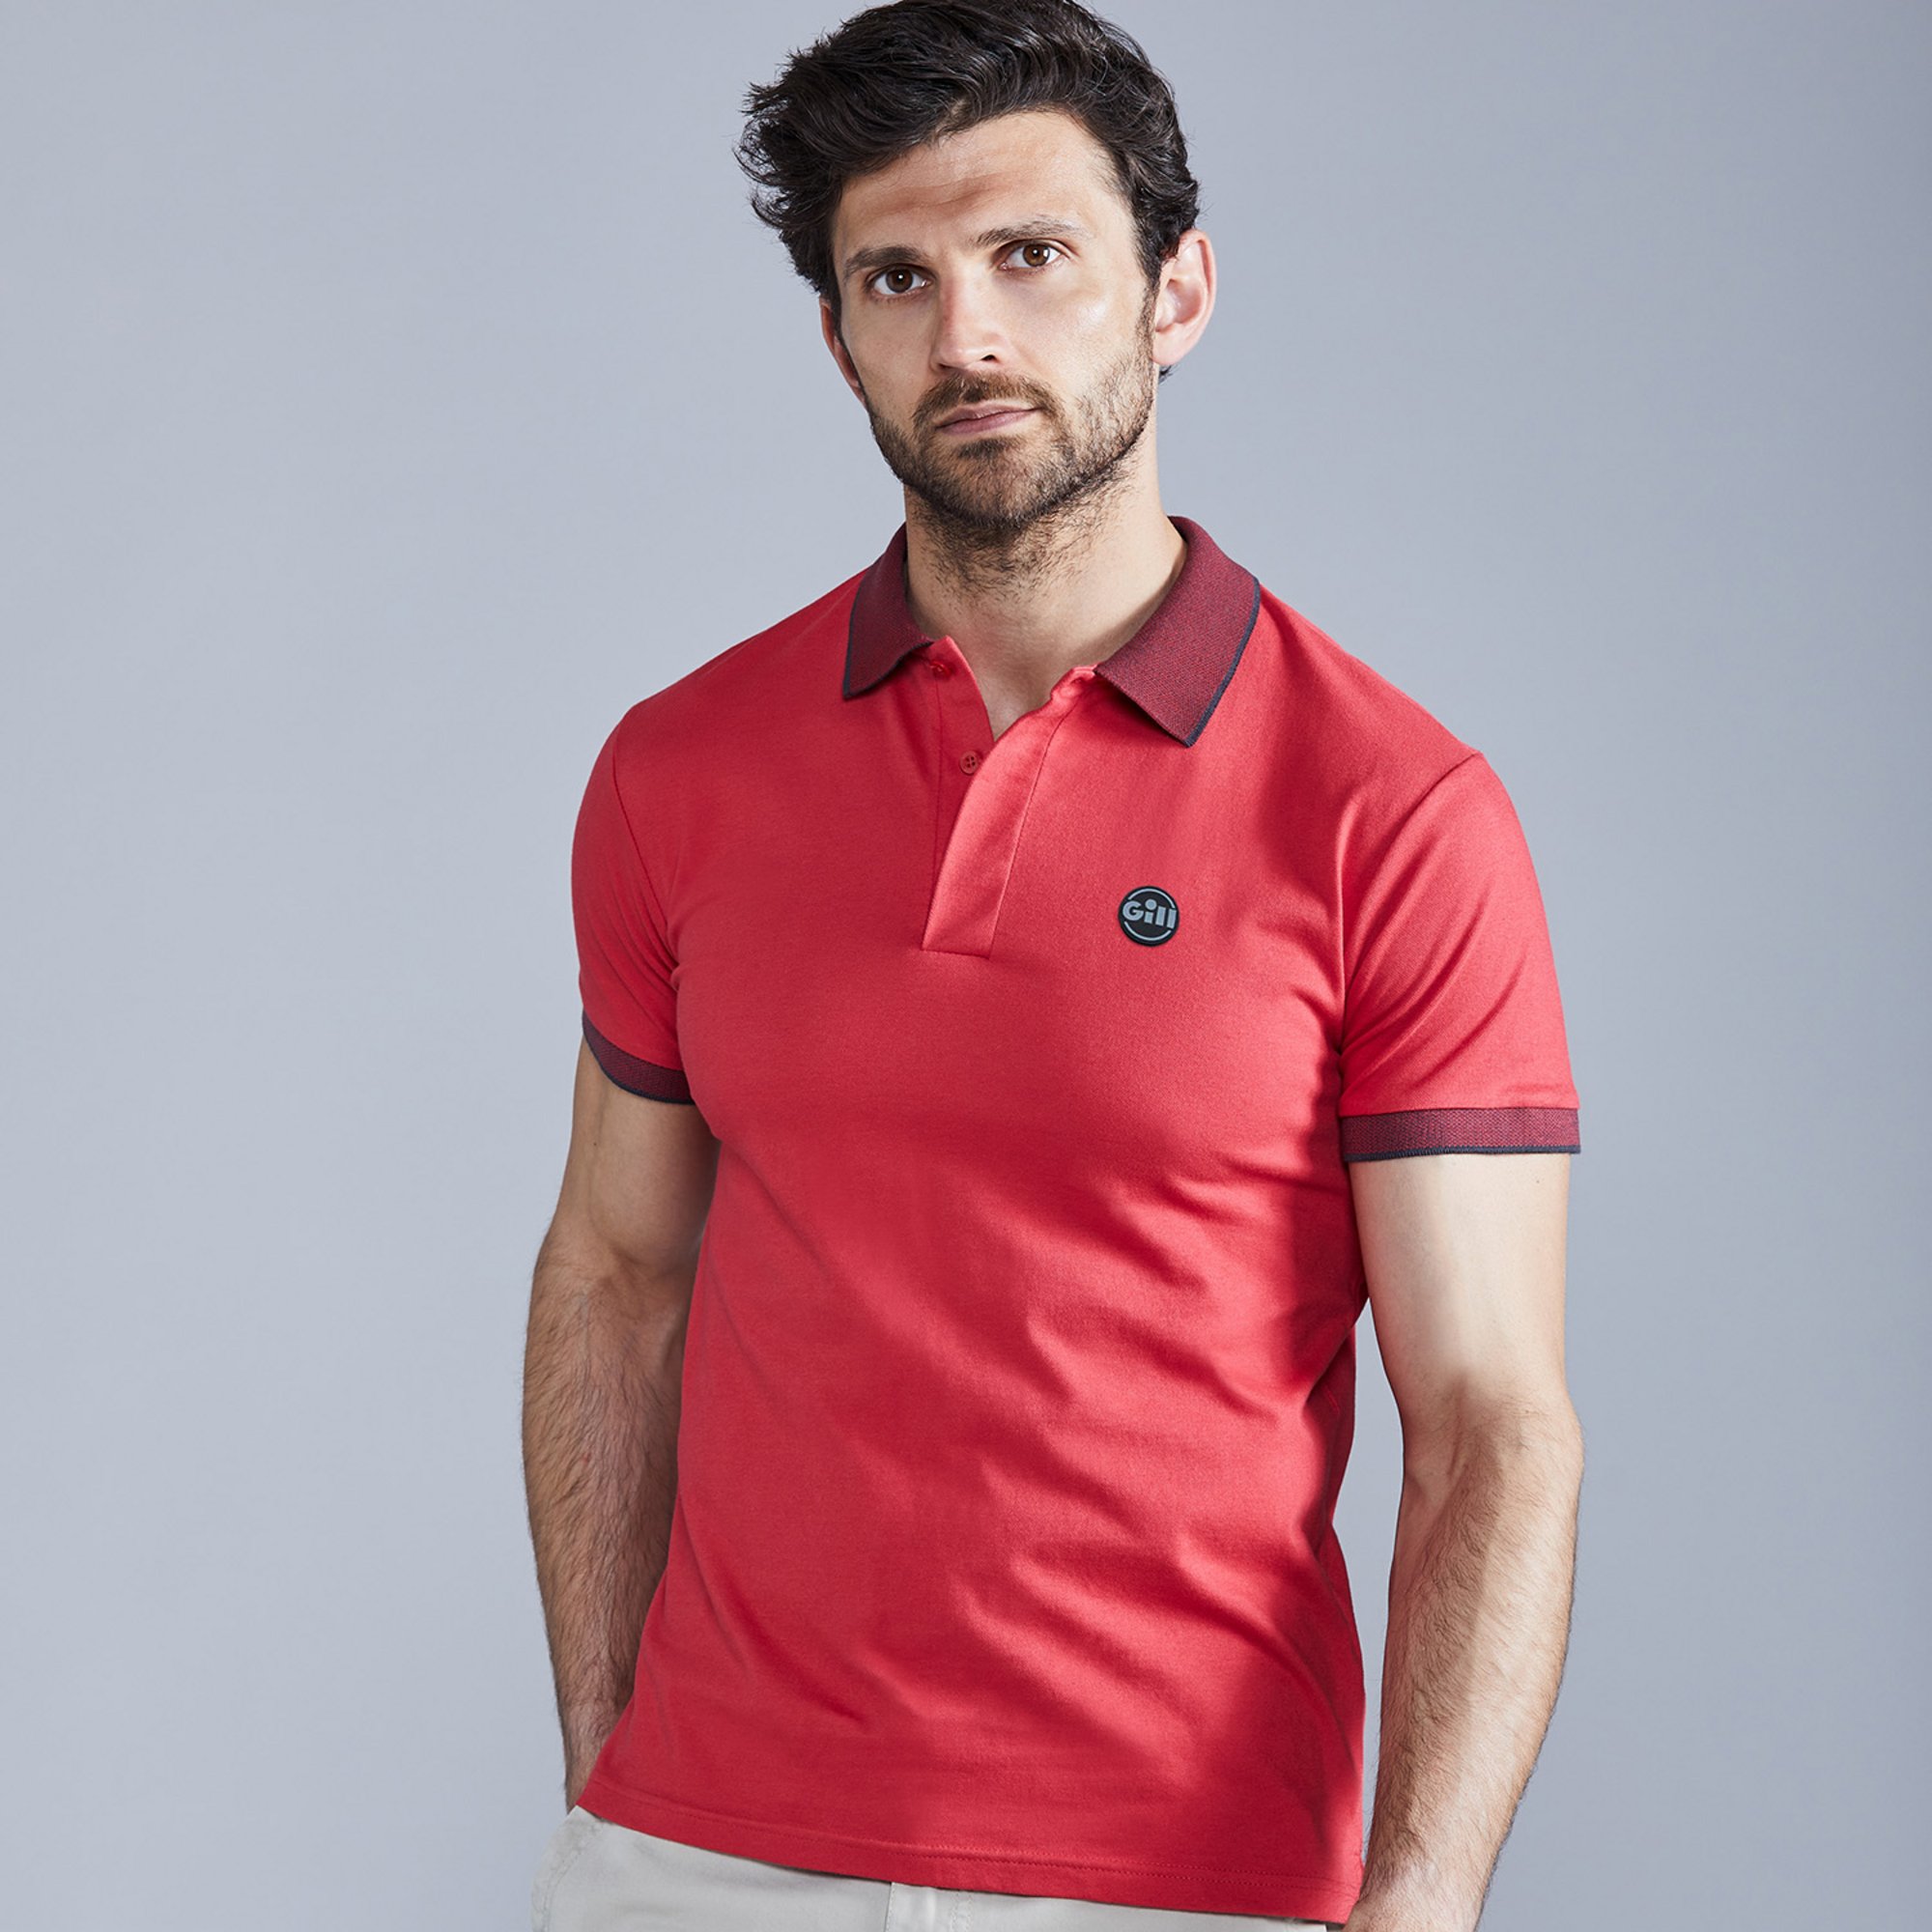 Lucca Polo - LS04-RED19-MODEL_1.jpg